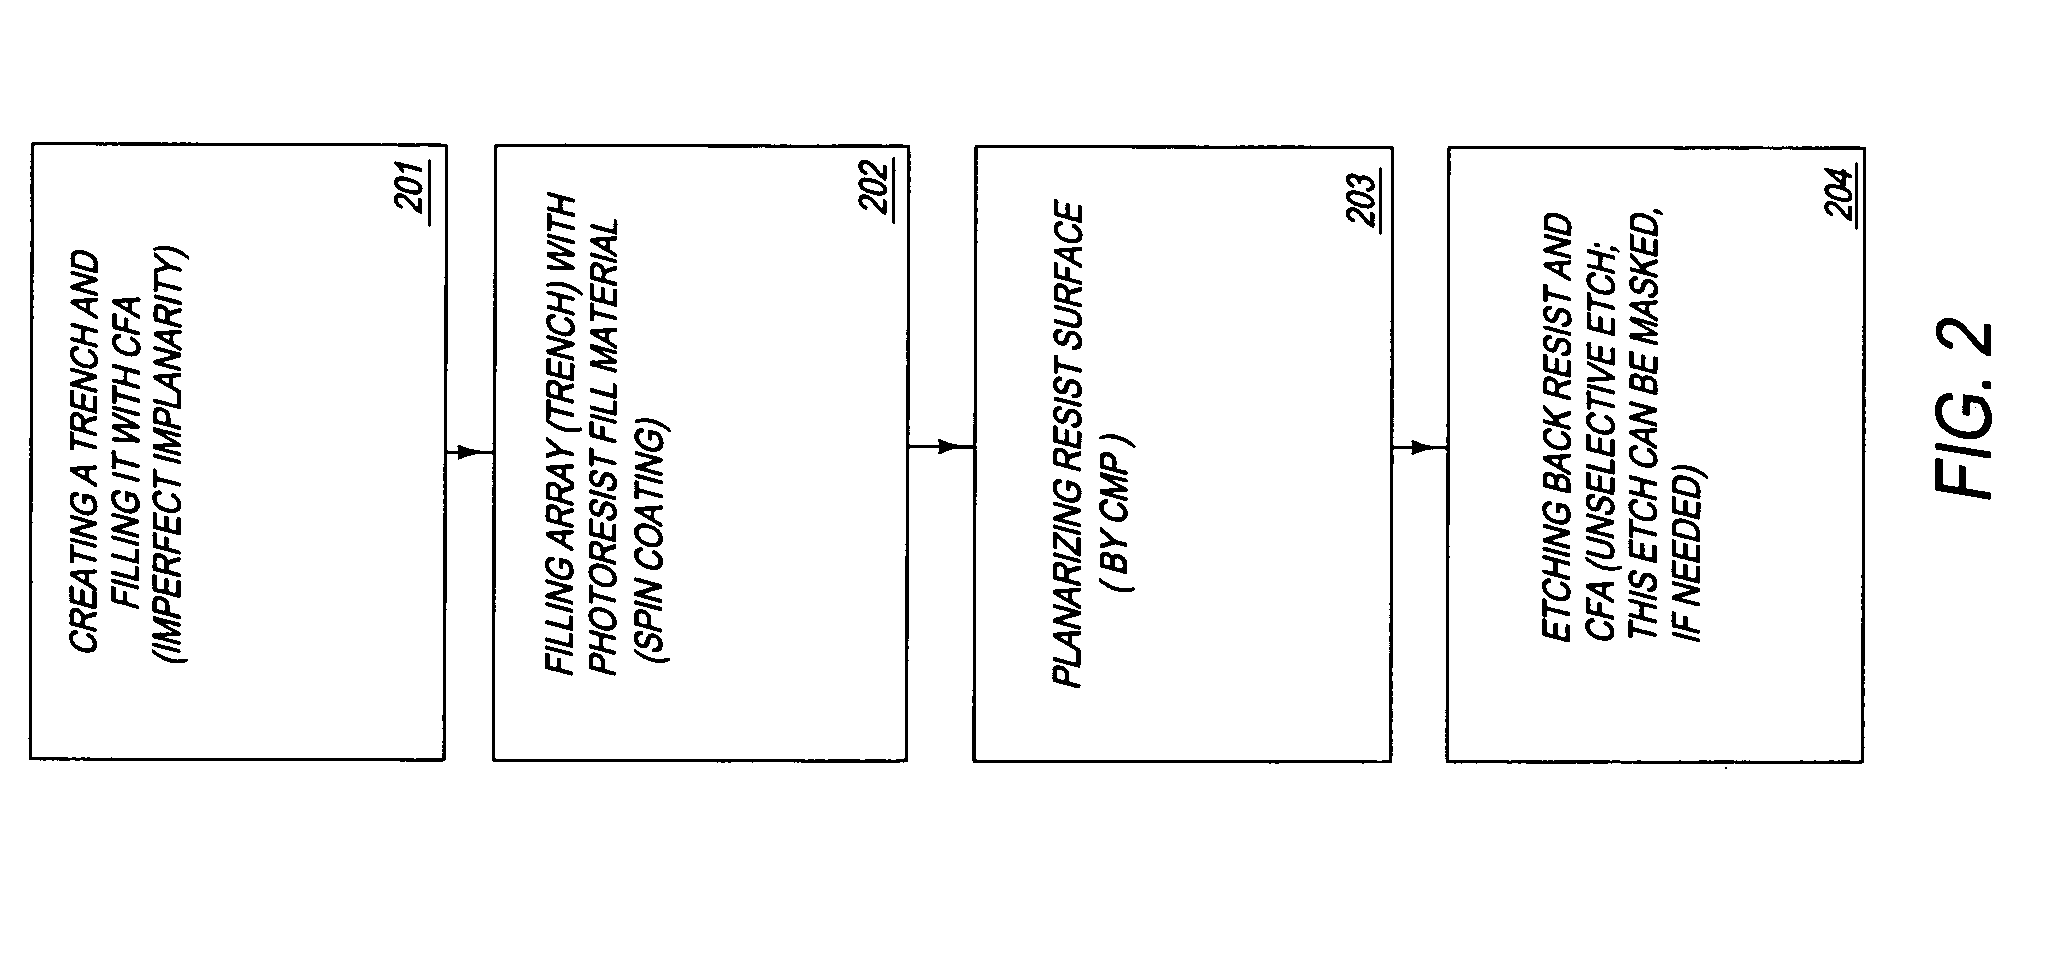 Method and apparatus providing a uniform color filter in a recessed region of an imager